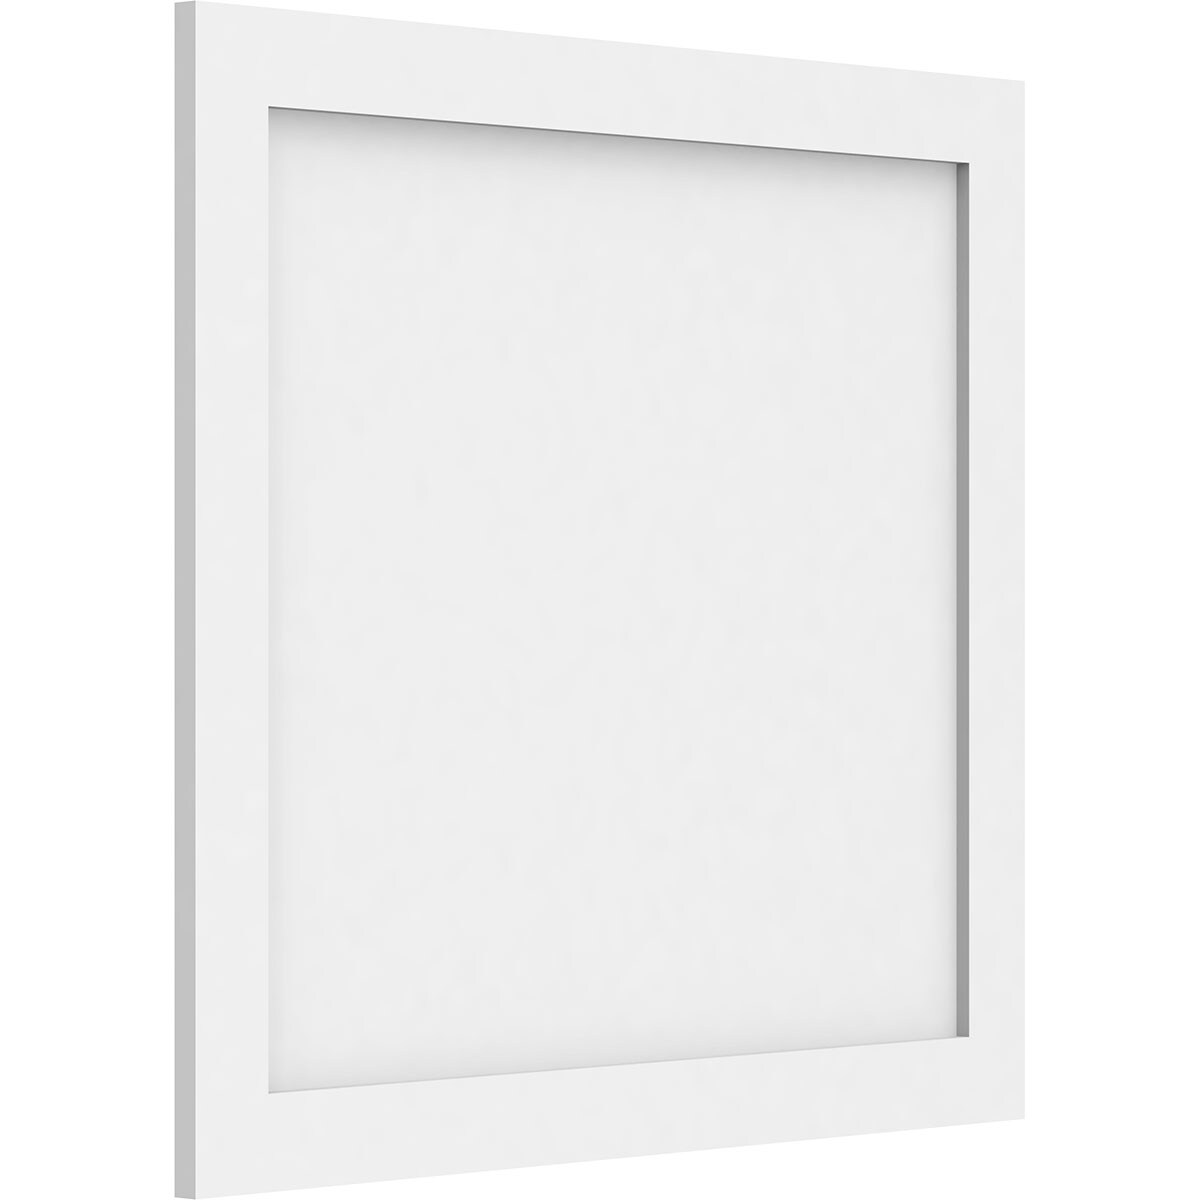 Ekena Millwork 26-in x 24-in Smooth White PVC Fretwork Wall Panel in ...